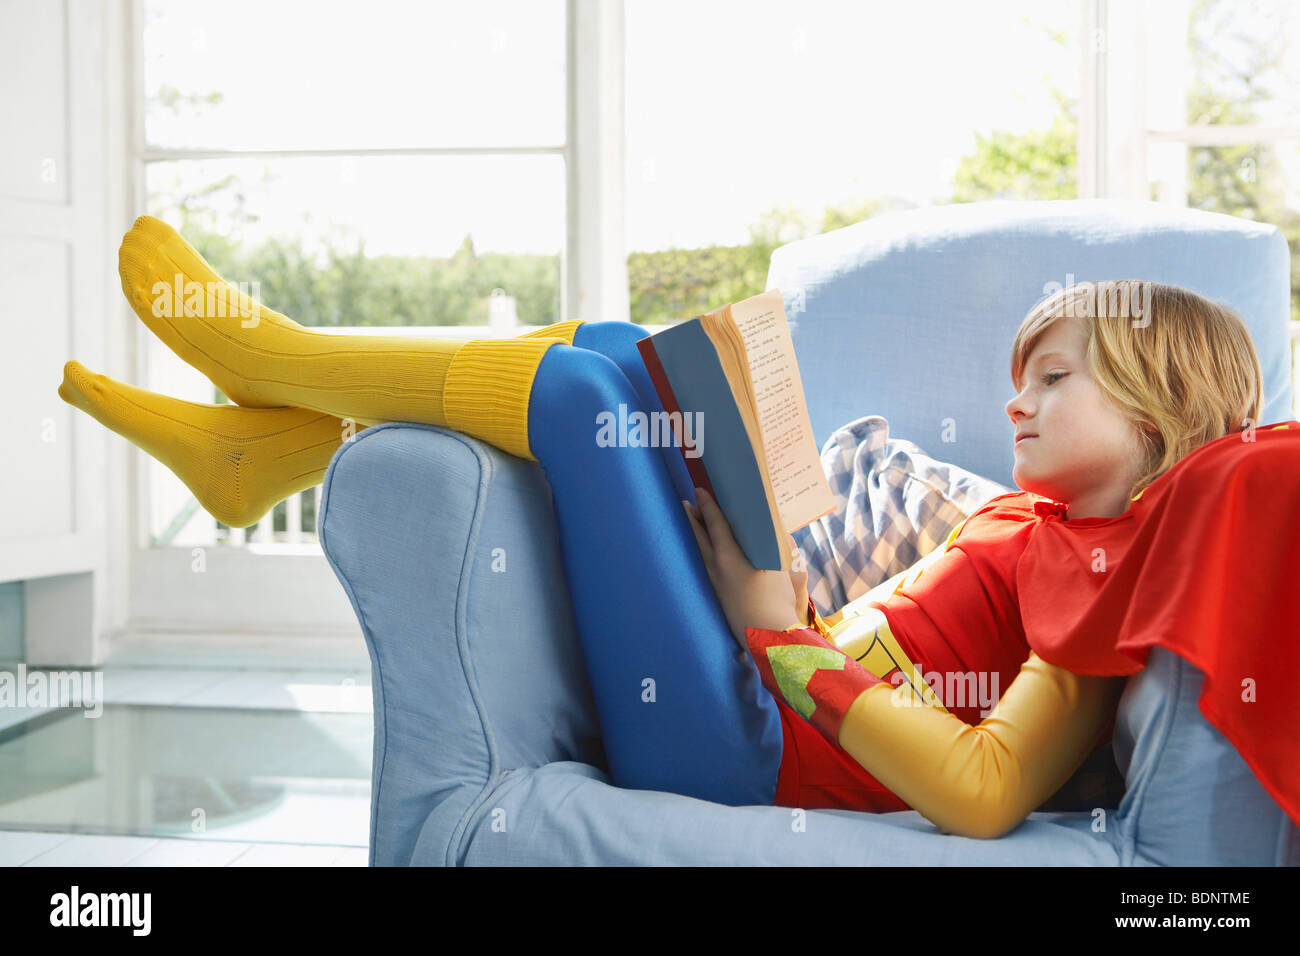 Young boy (7-9) sitting in armchair lecture, wearing superhero costume, side view Banque D'Images